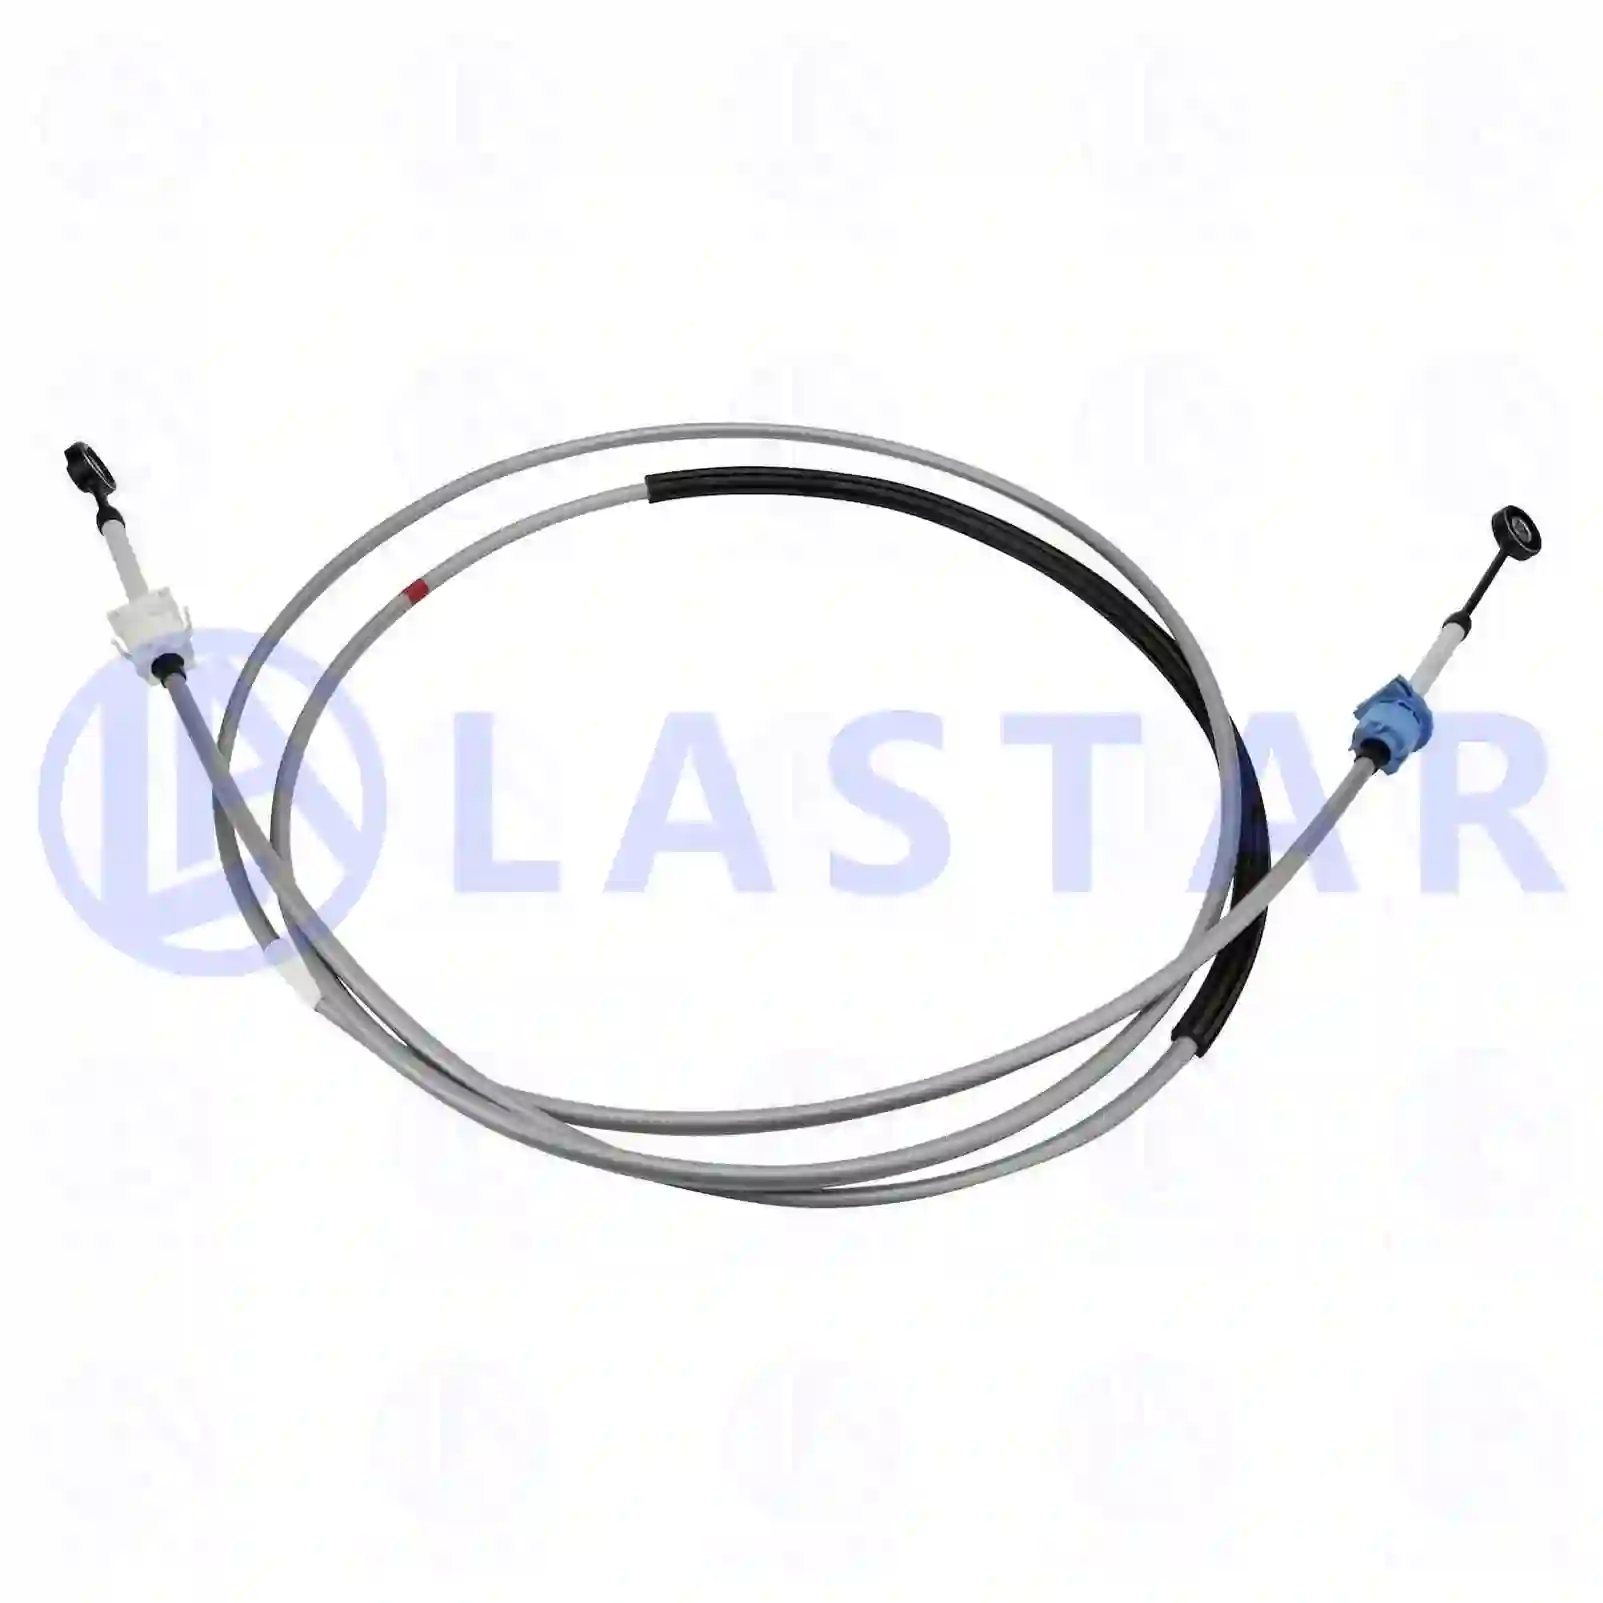 Control cable, switching, 77732440, 20545983, 20700983, 21002883, 21343583, 21789711, ZG21348-0008 ||  77732440 Lastar Spare Part | Truck Spare Parts, Auotomotive Spare Parts Control cable, switching, 77732440, 20545983, 20700983, 21002883, 21343583, 21789711, ZG21348-0008 ||  77732440 Lastar Spare Part | Truck Spare Parts, Auotomotive Spare Parts